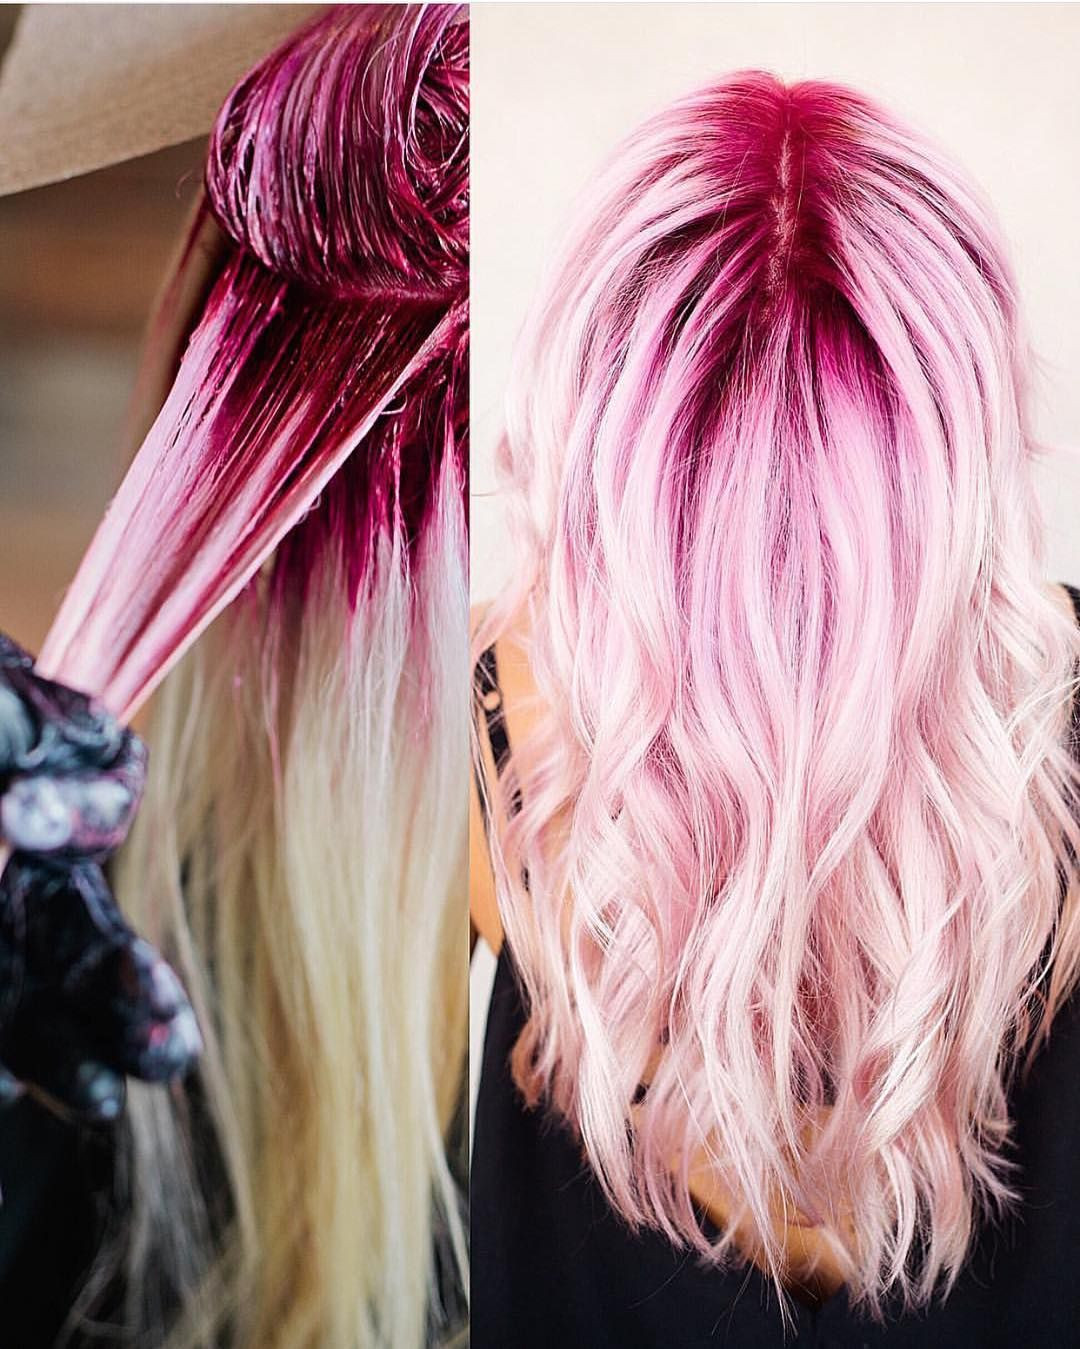 DIY Pastel Pink Hair
 During and after shots by jaywesleyolson Jay this pink